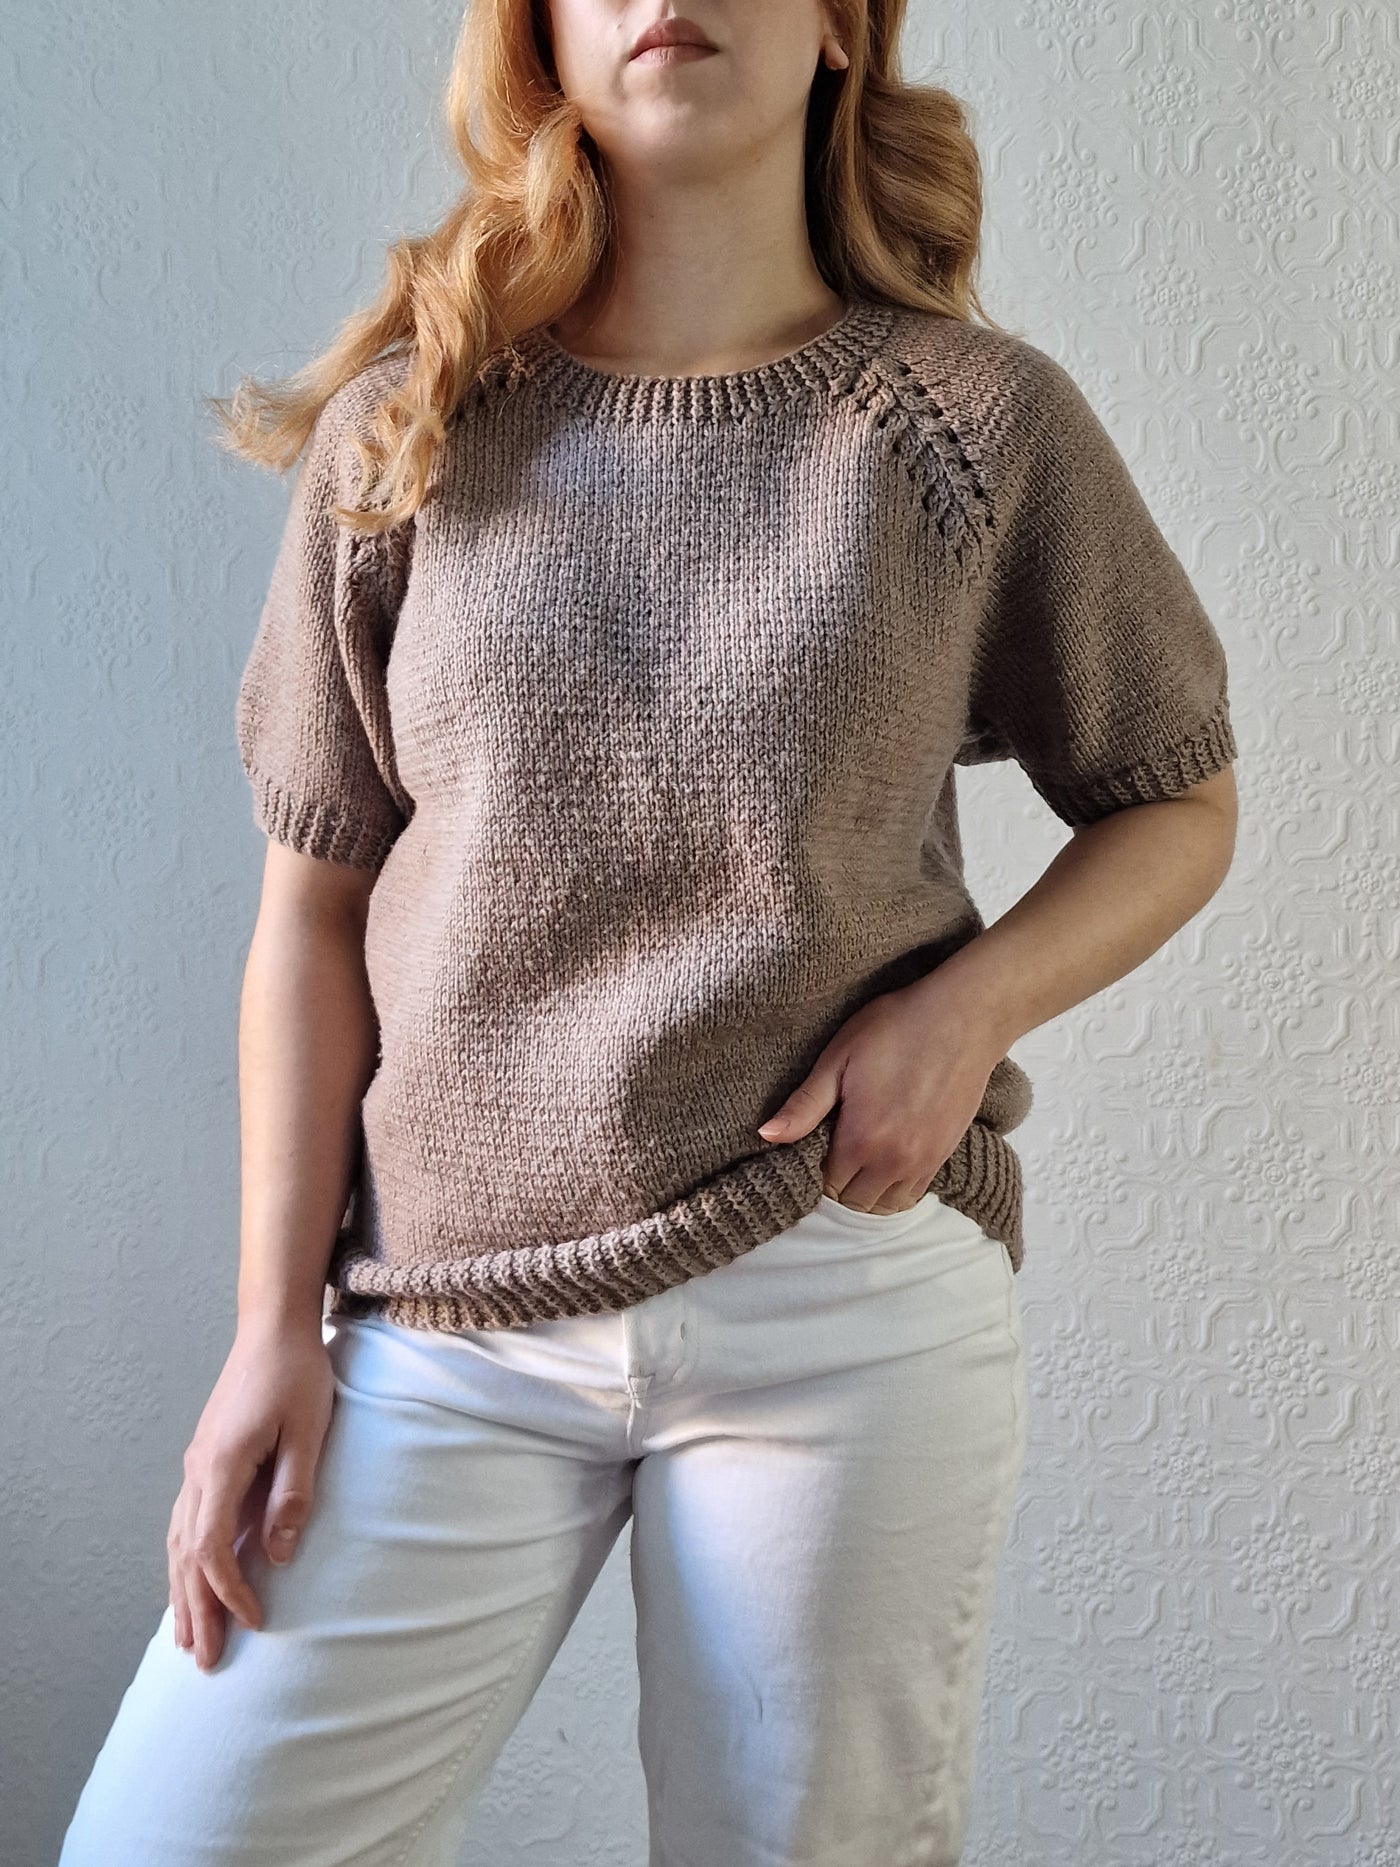 Vintage 80s Light Brown Round Neck Handknitted Jumper Top with Short Sleeves - S/M